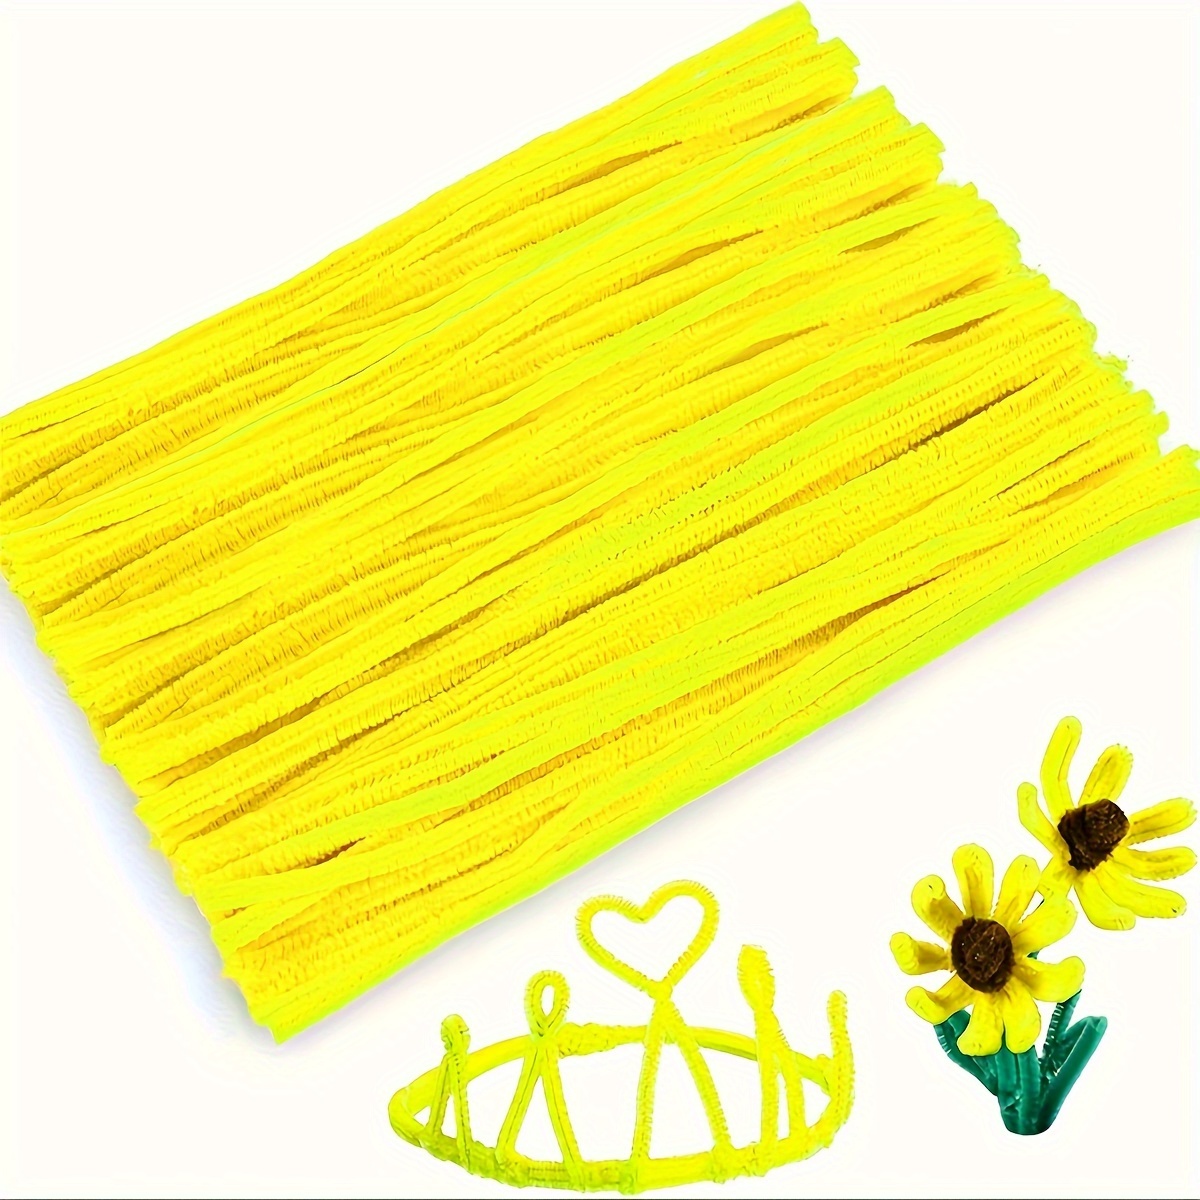 

200pcs Yellow Pipe Cleaners Set For Crafts, Upgrade Furry Chenille Stems Stick, Diy Arts Crafts Project, Creative Home Decoration Supplies, Fuzzy Sticks, Bendy Sticks, Plush Sticks Rods